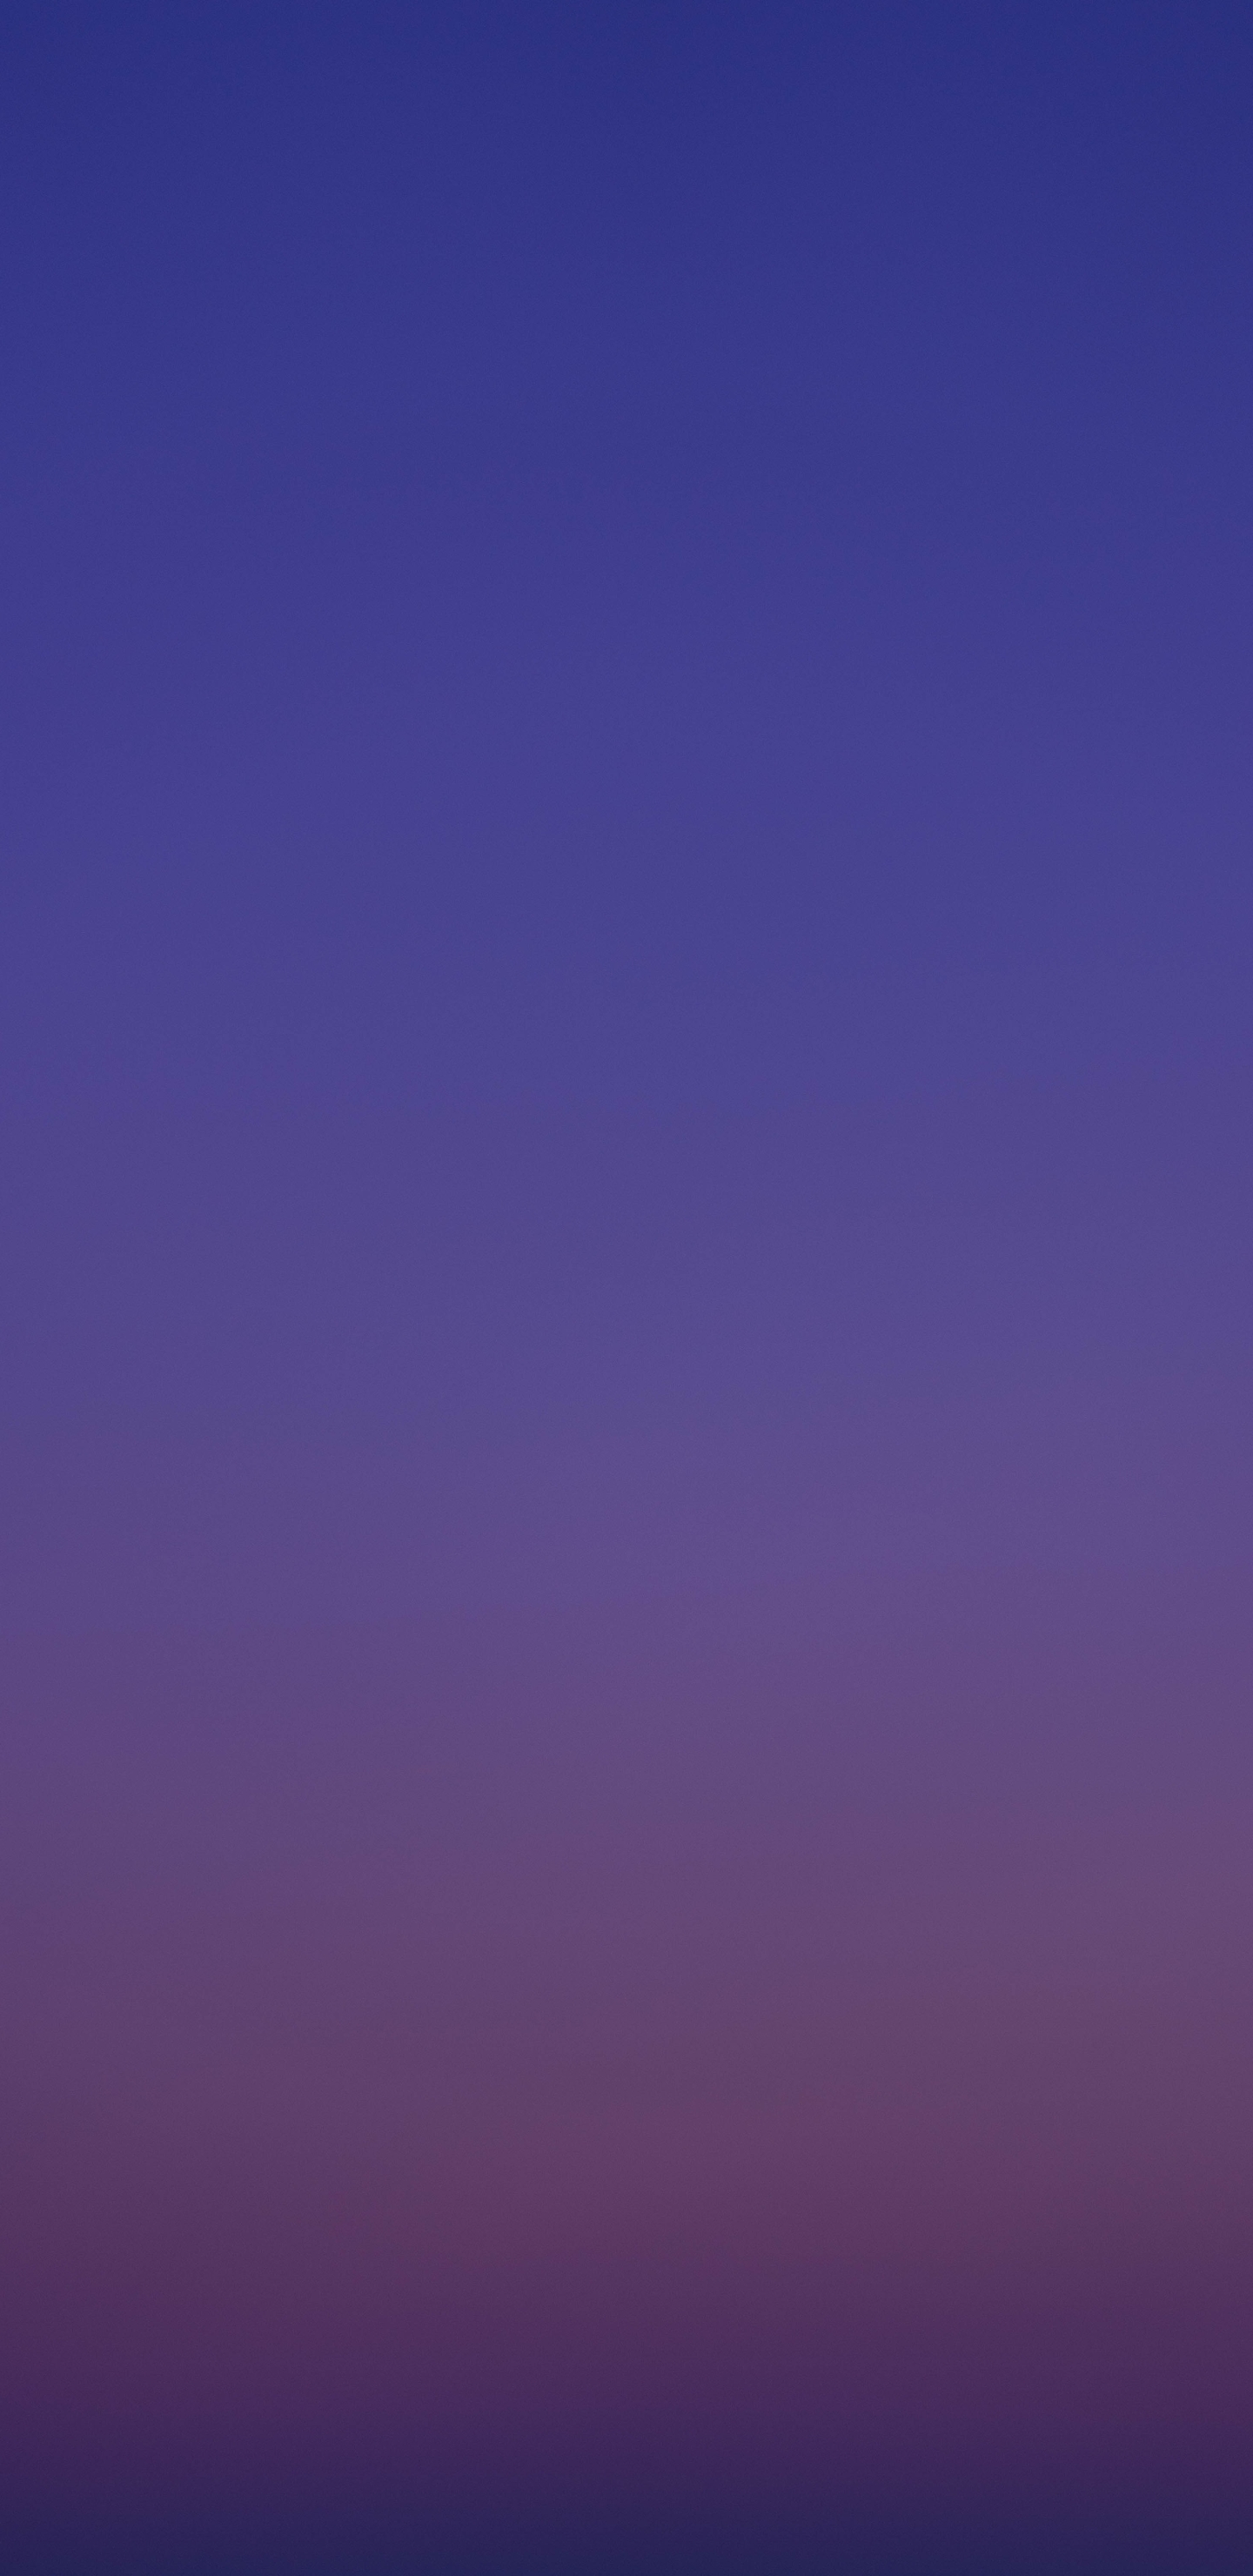 1440x2960 Gradient Sky Samsung Galaxy Note 9,8, S9,S8,S8+ QHD Wallpaper, HD  Nature 4K Wallpapers, Images, Photos and Background - Wallpapers Den